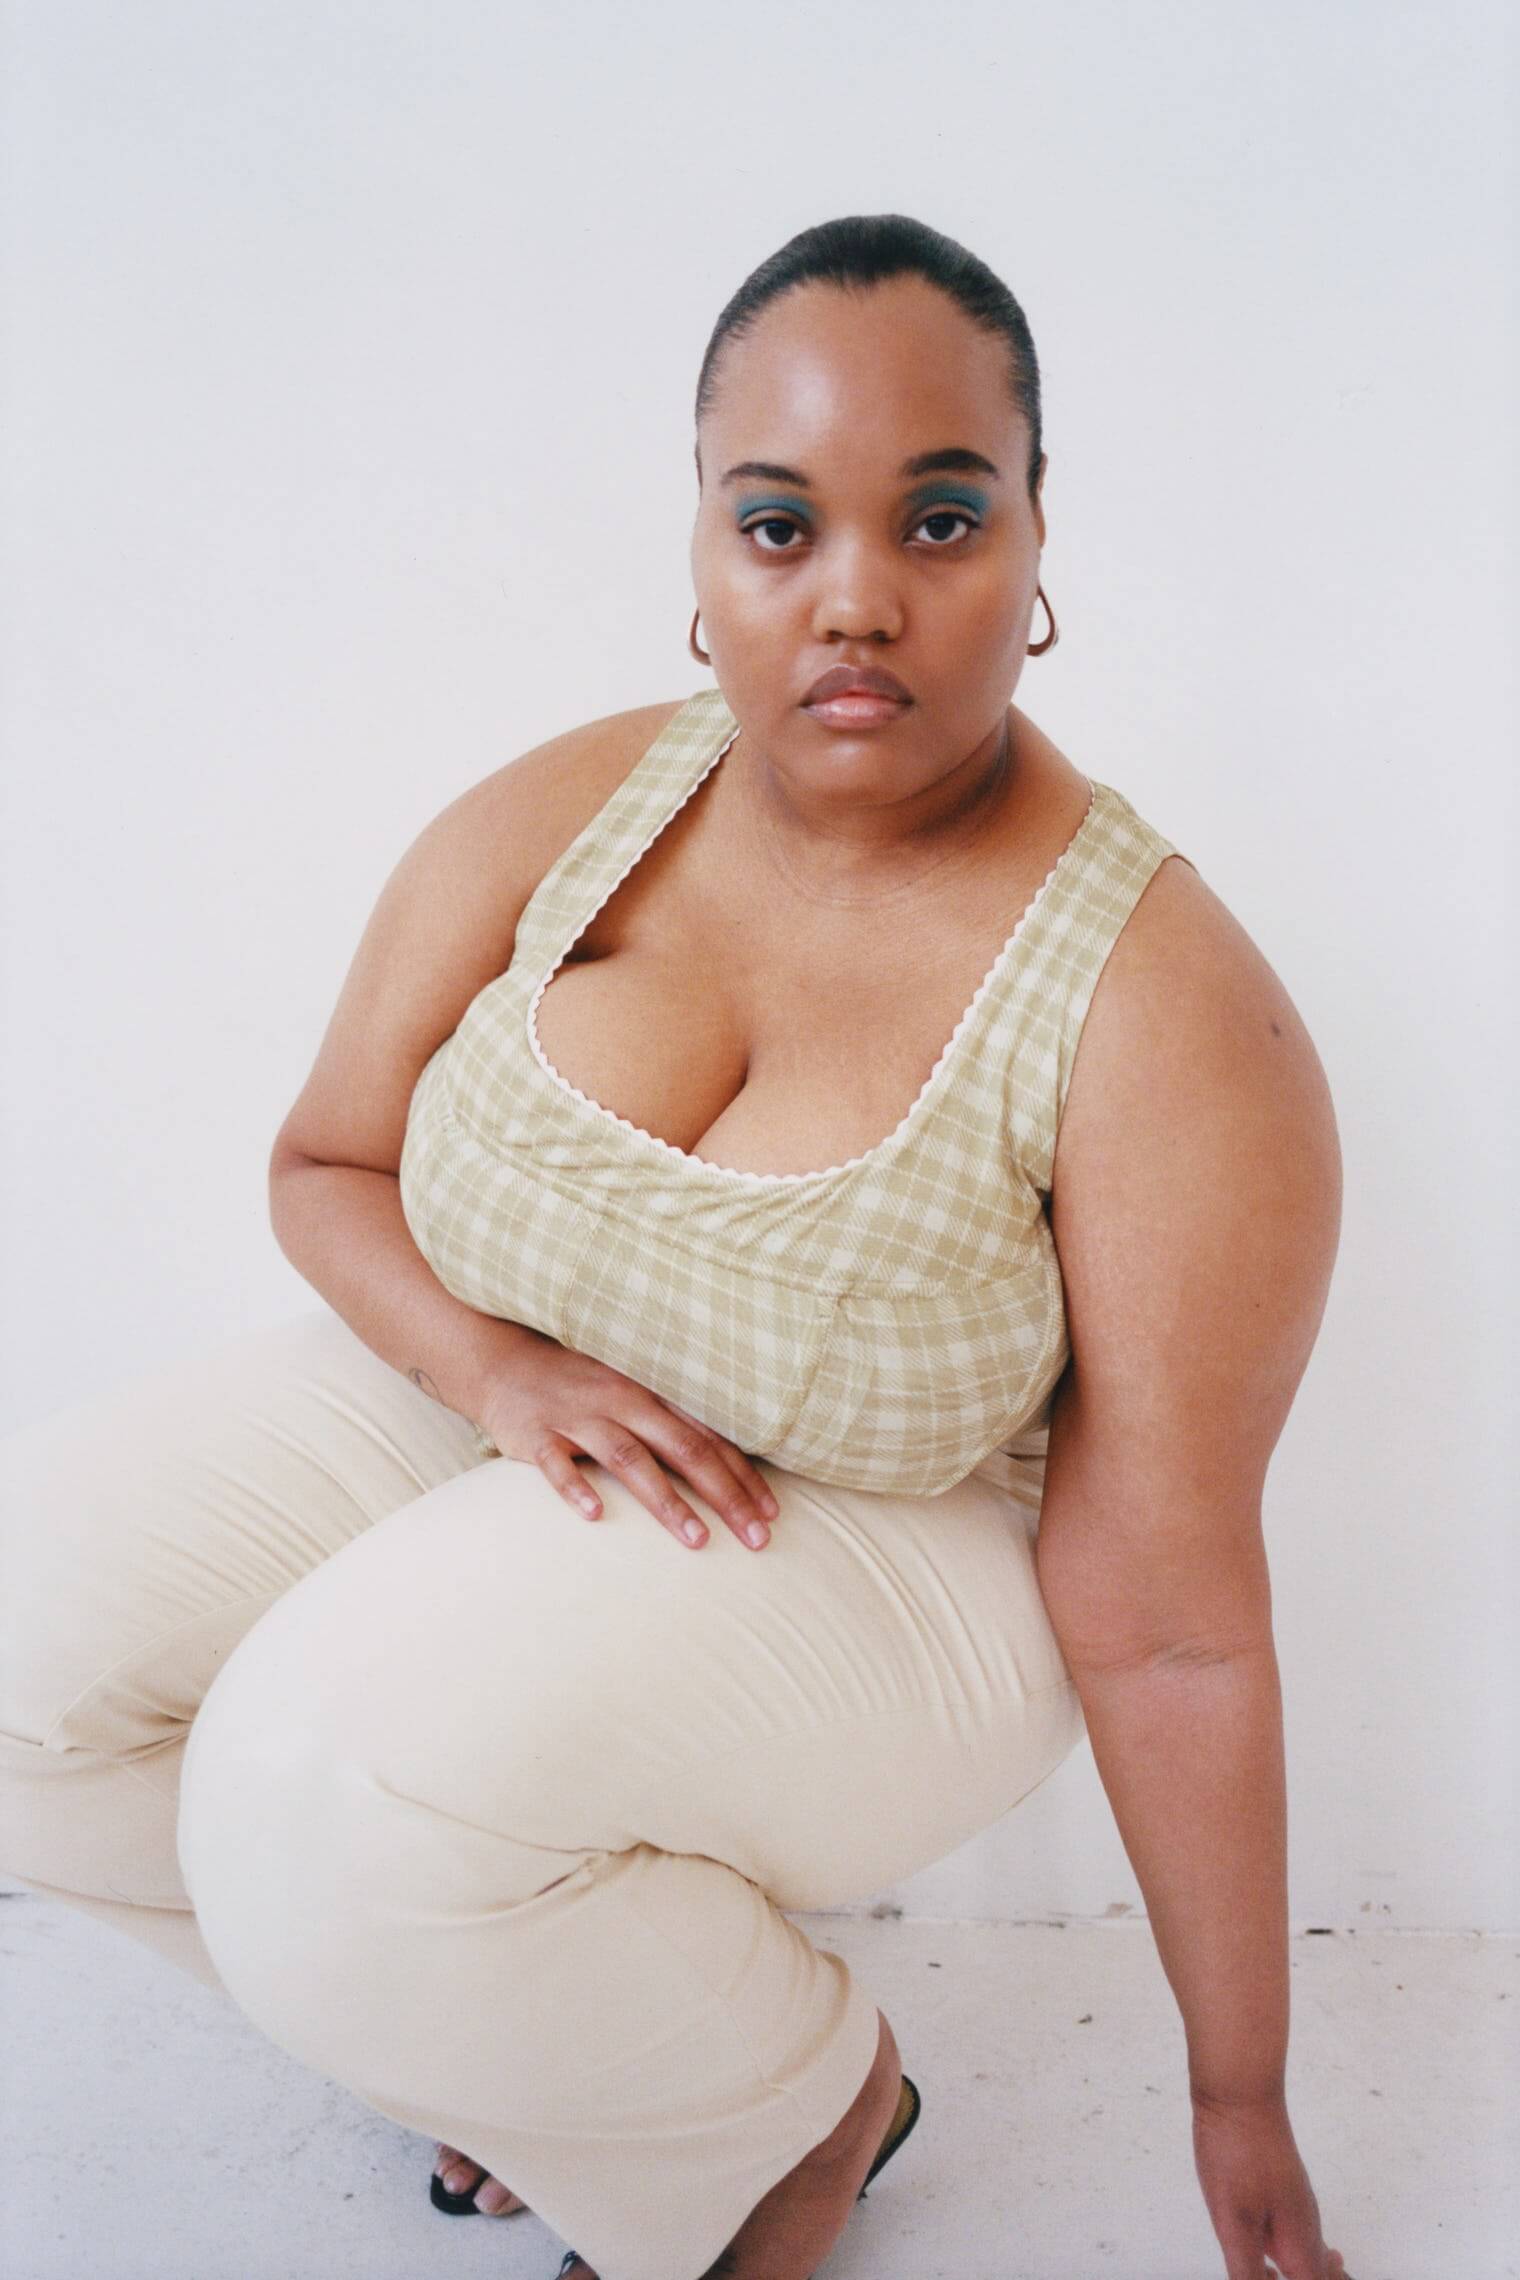 Miaou & Paloma Elsesser Release Plus-Size Collection